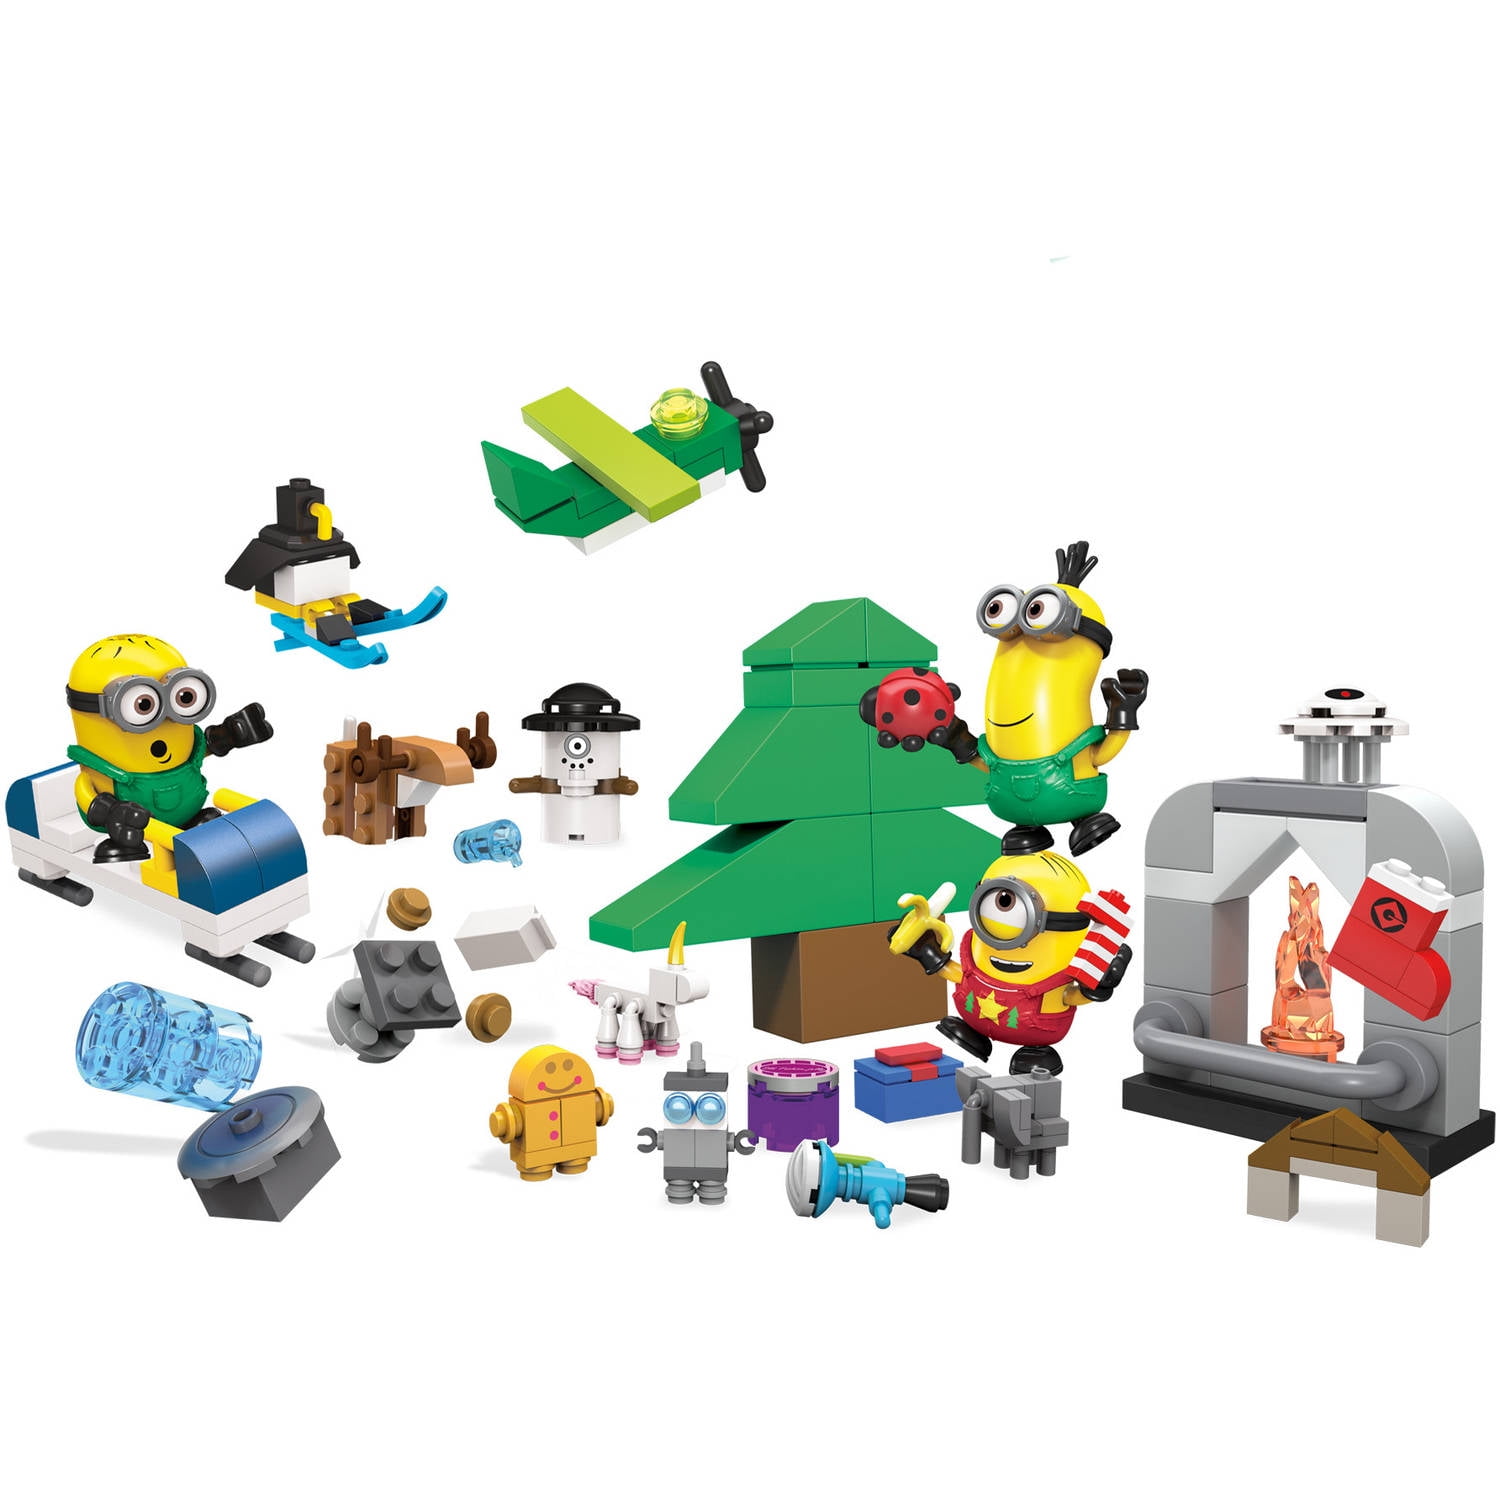 Toy Minion Lego Minions 75546 working in the lab of LEGO Glue, Toy Hobby